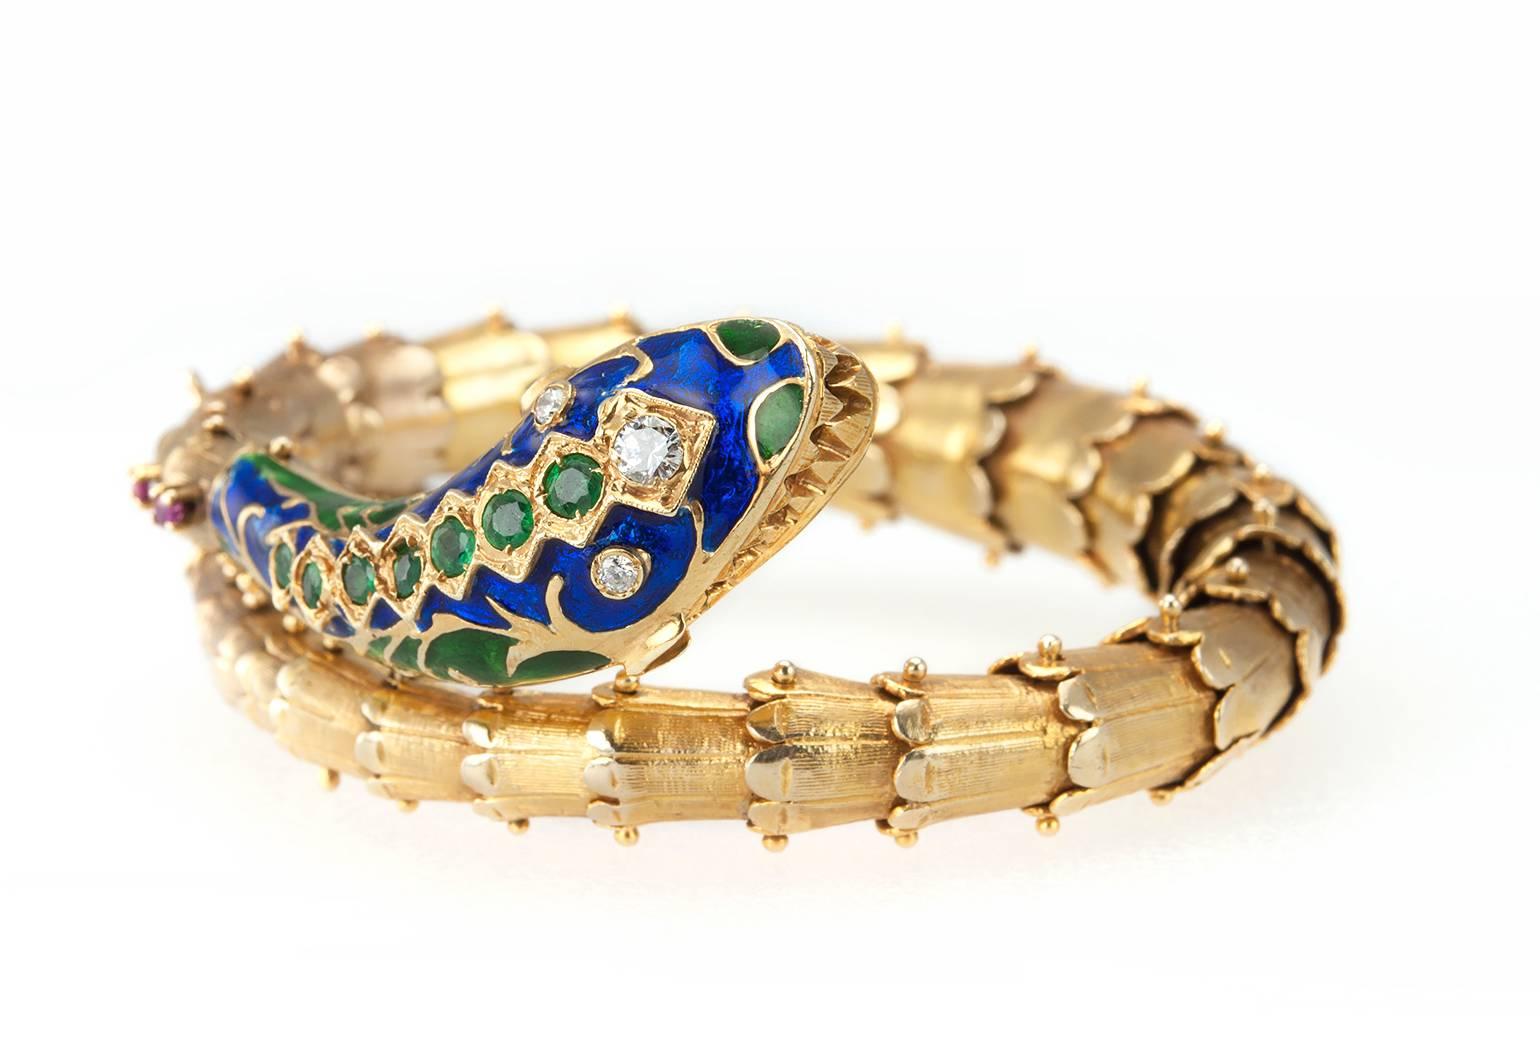 1950s Enamel Gold Snake Bracelet In Excellent Condition For Sale In Los Angeles, CA